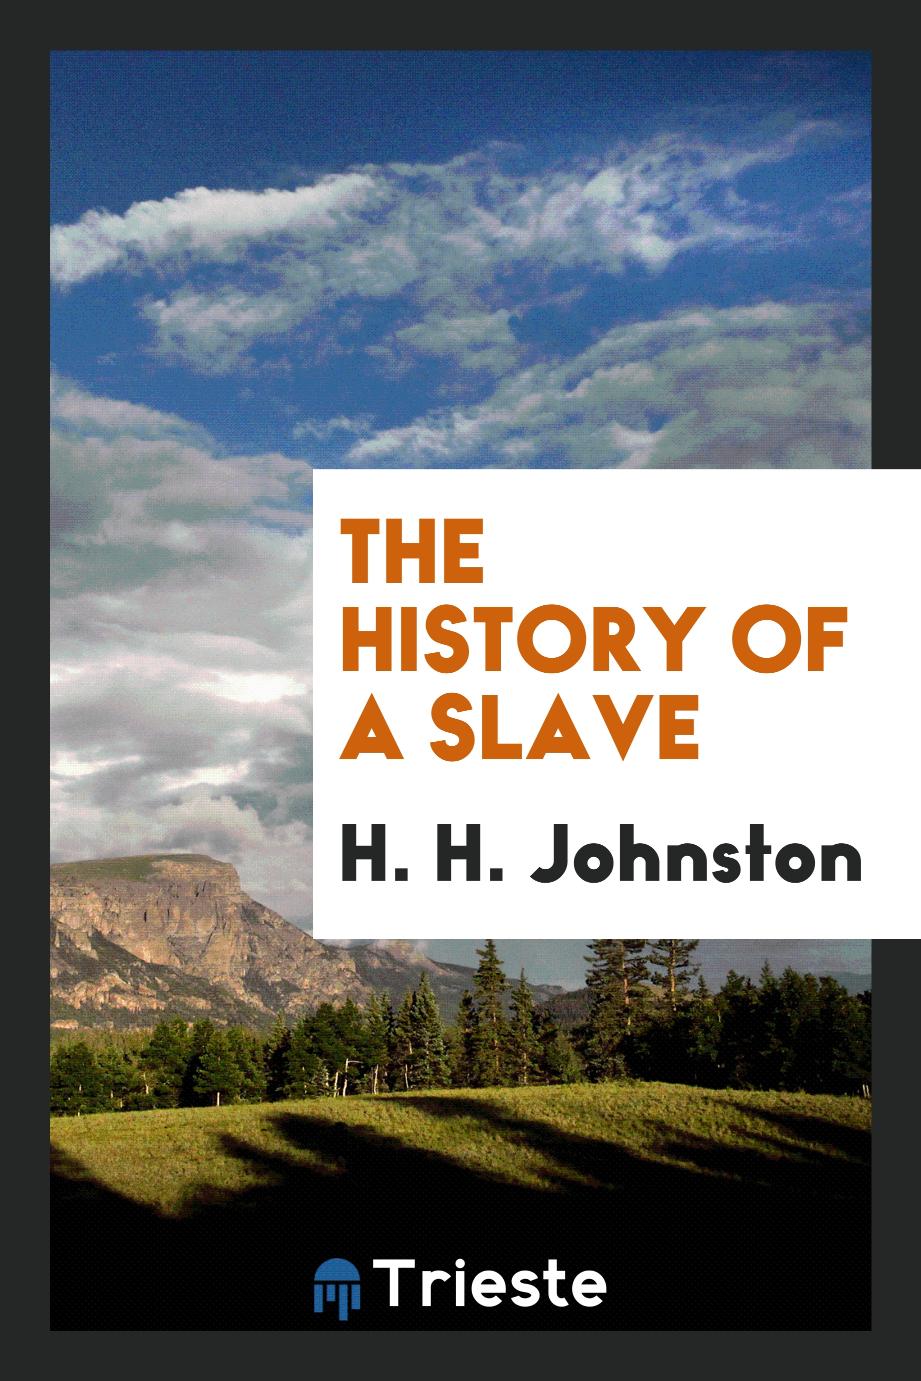 The history of a slave